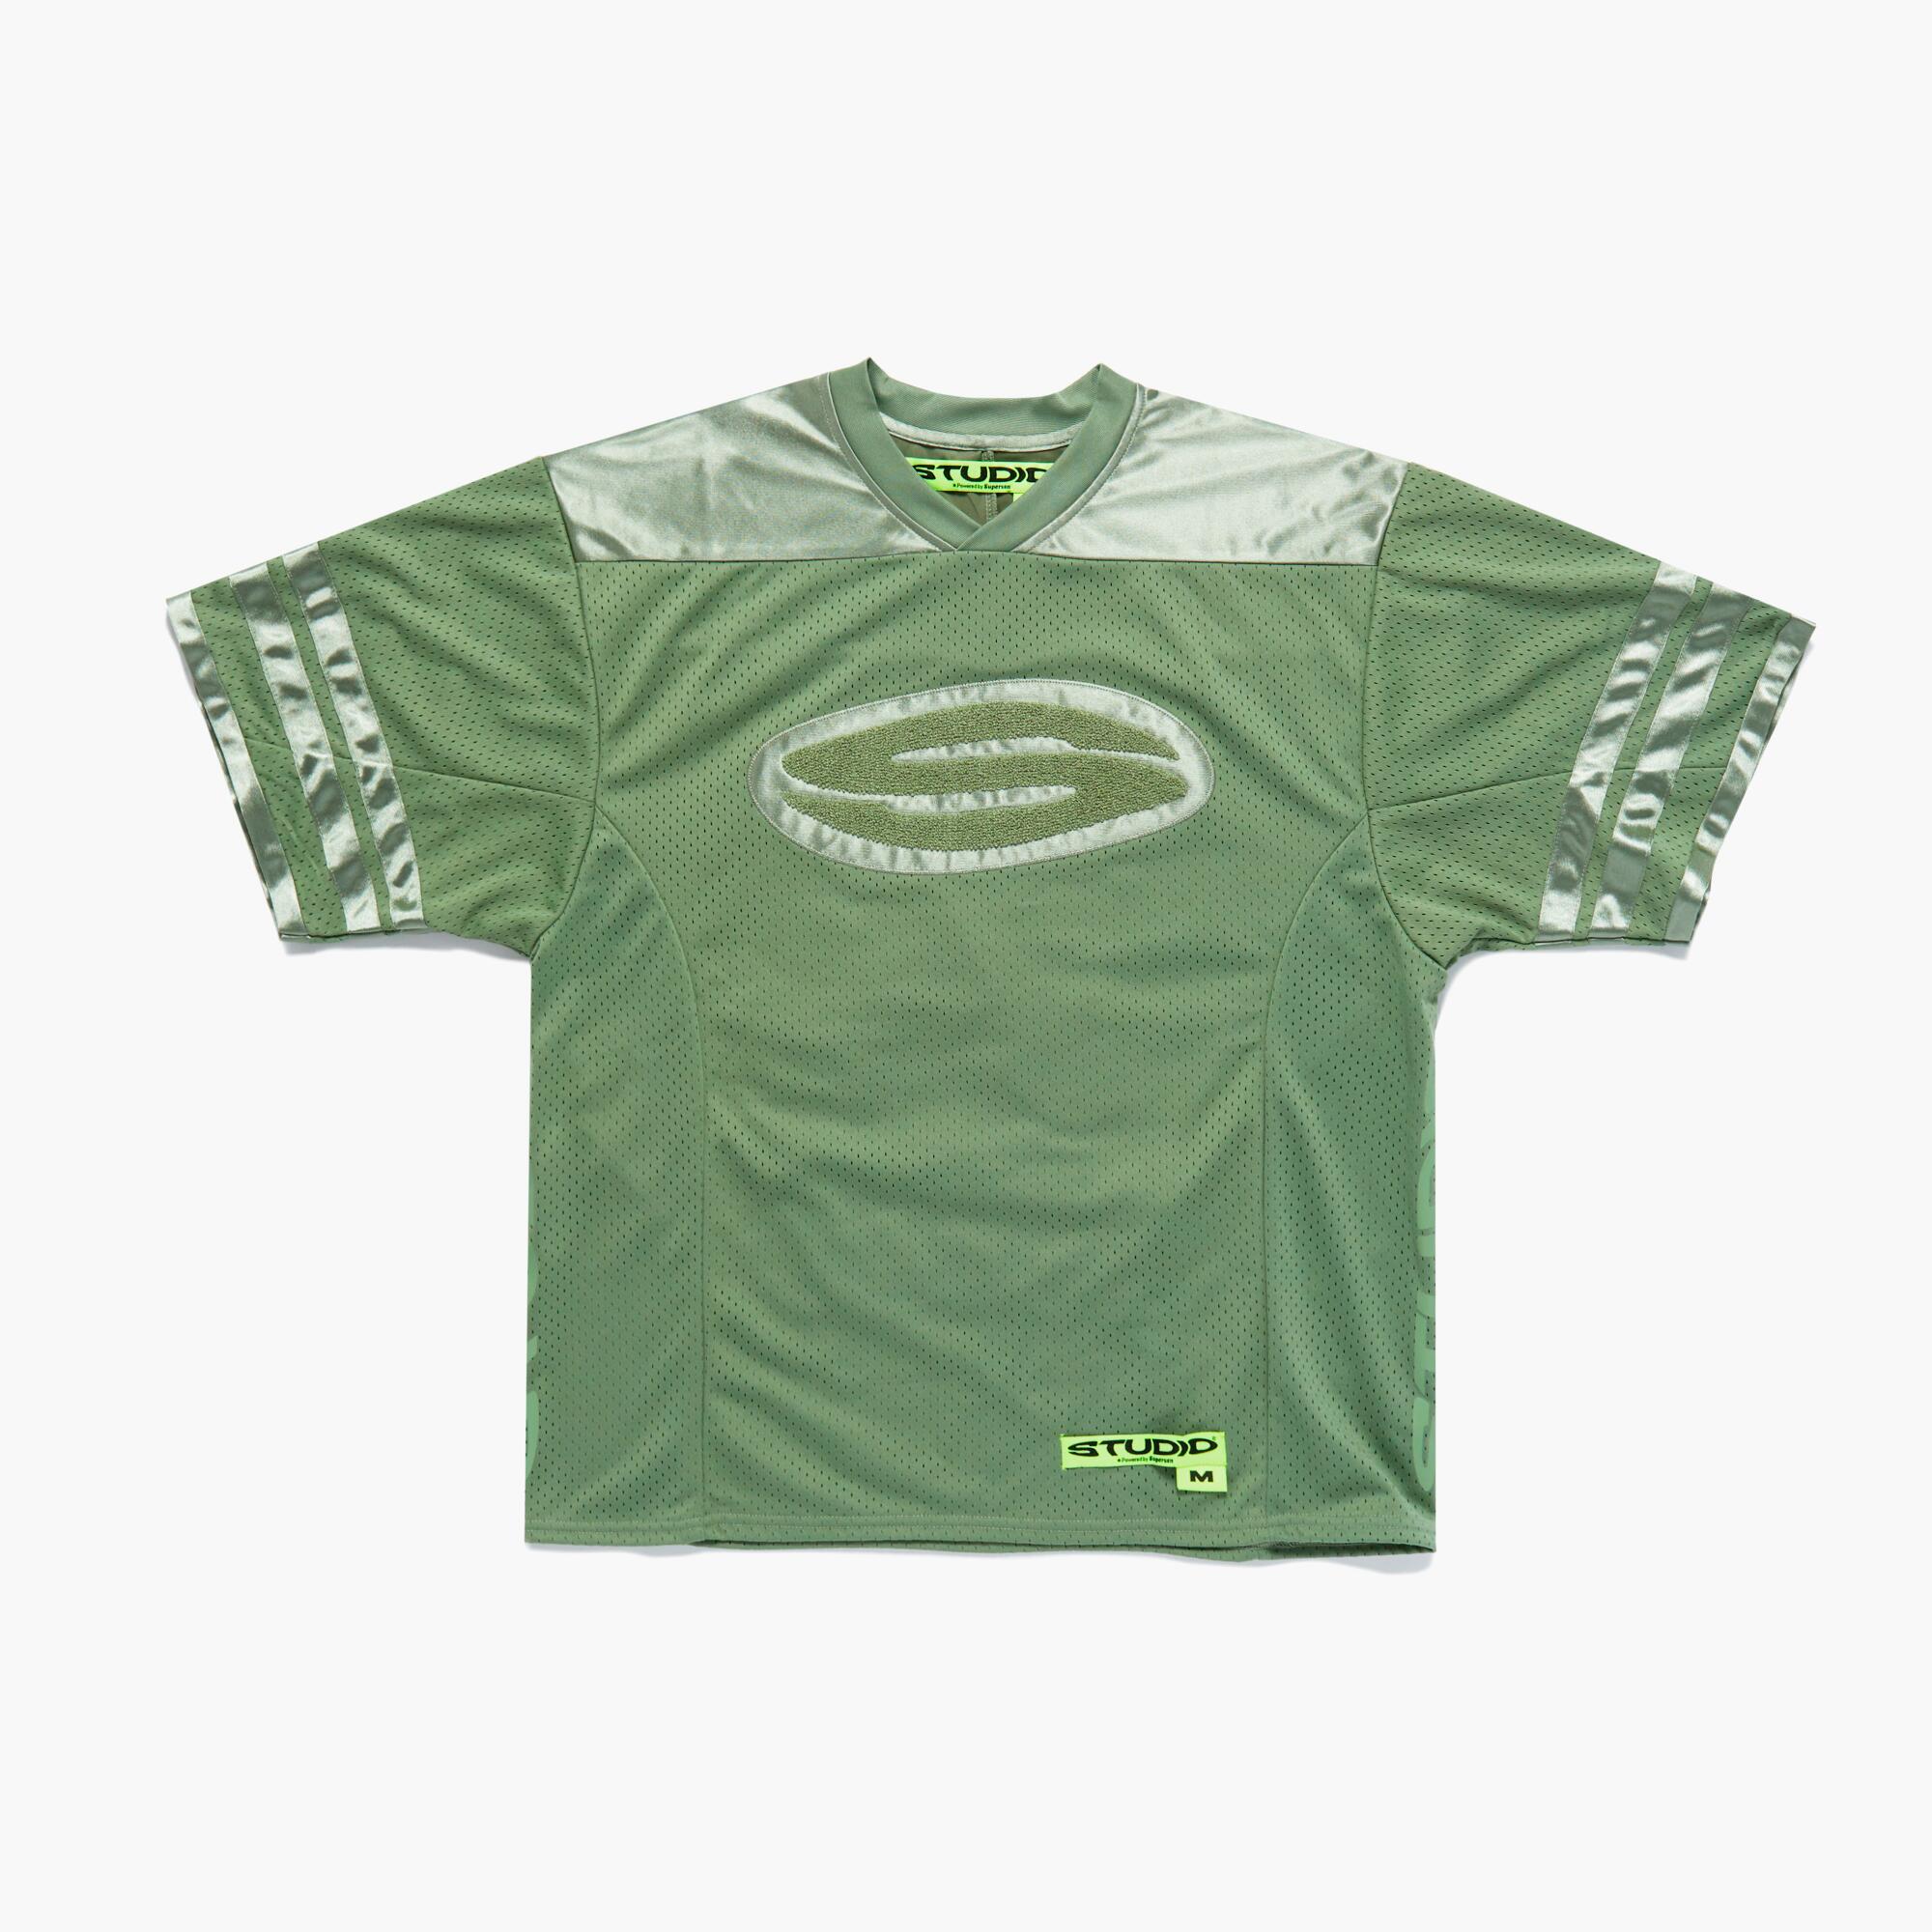 A green shirt with an S on the chest